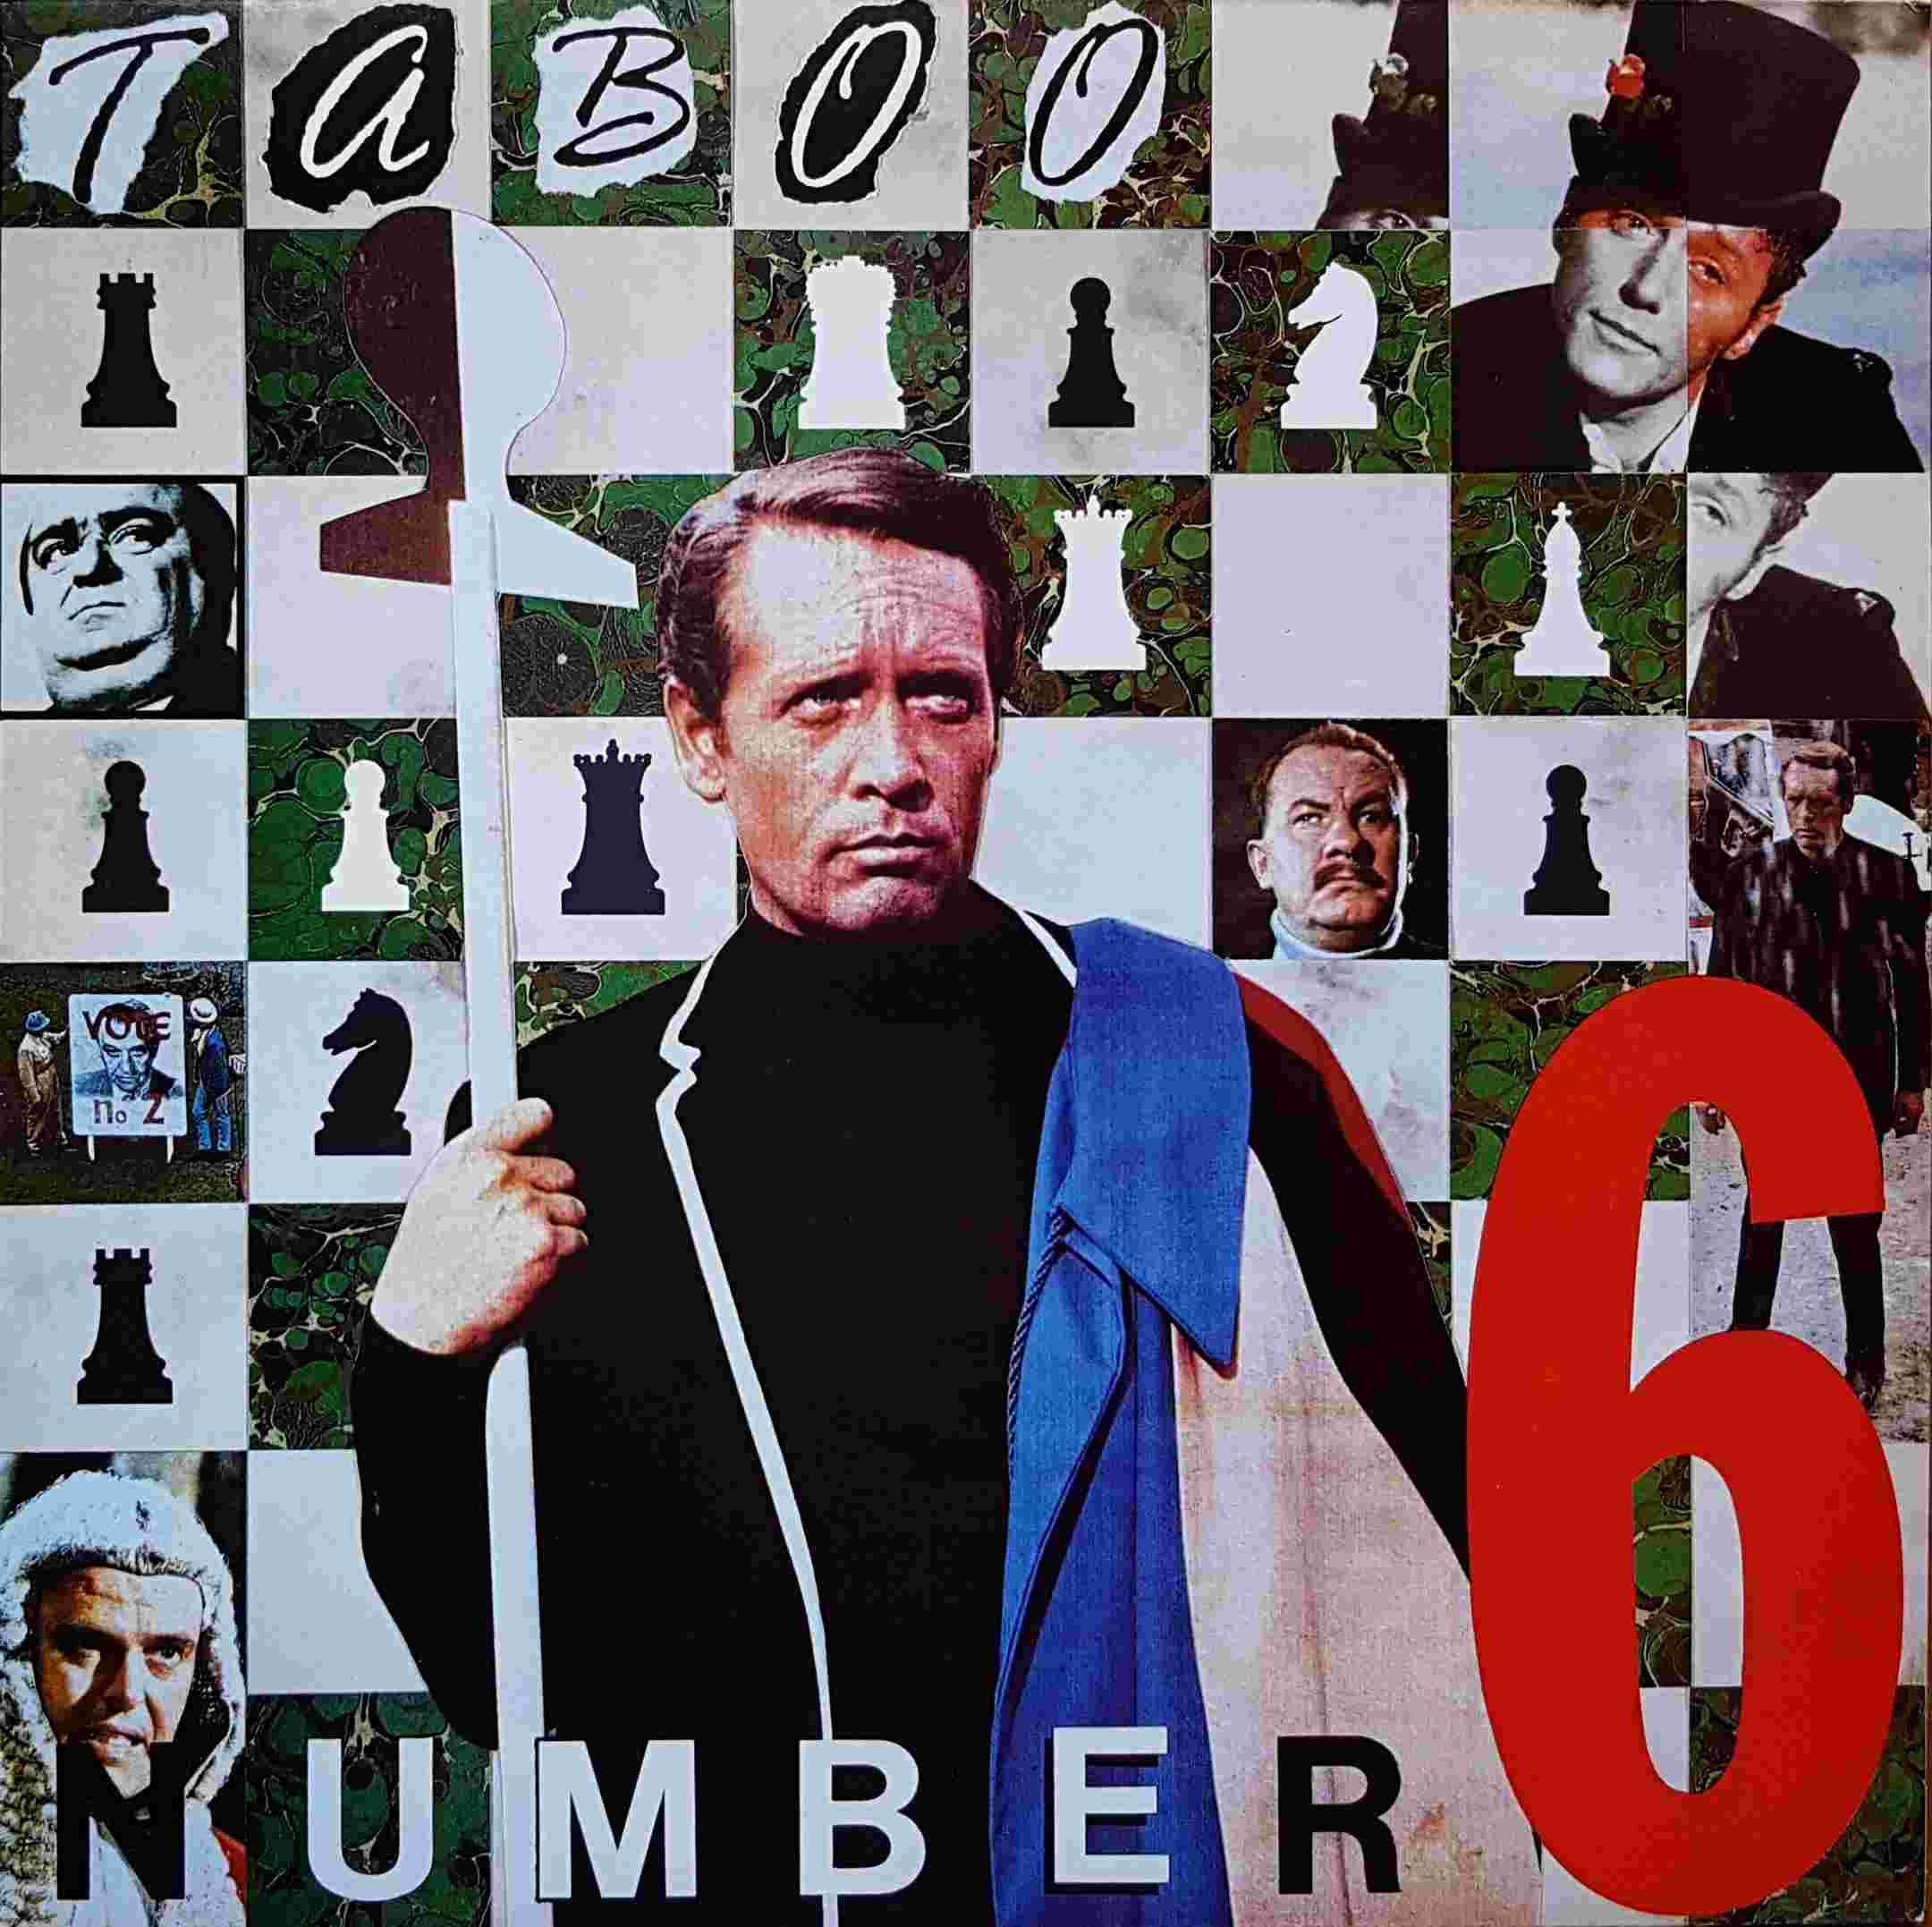 Picture of Number 6 (The prisoner) by artist Taboo from ITV, Channel 4 and Channel 5 12inches library